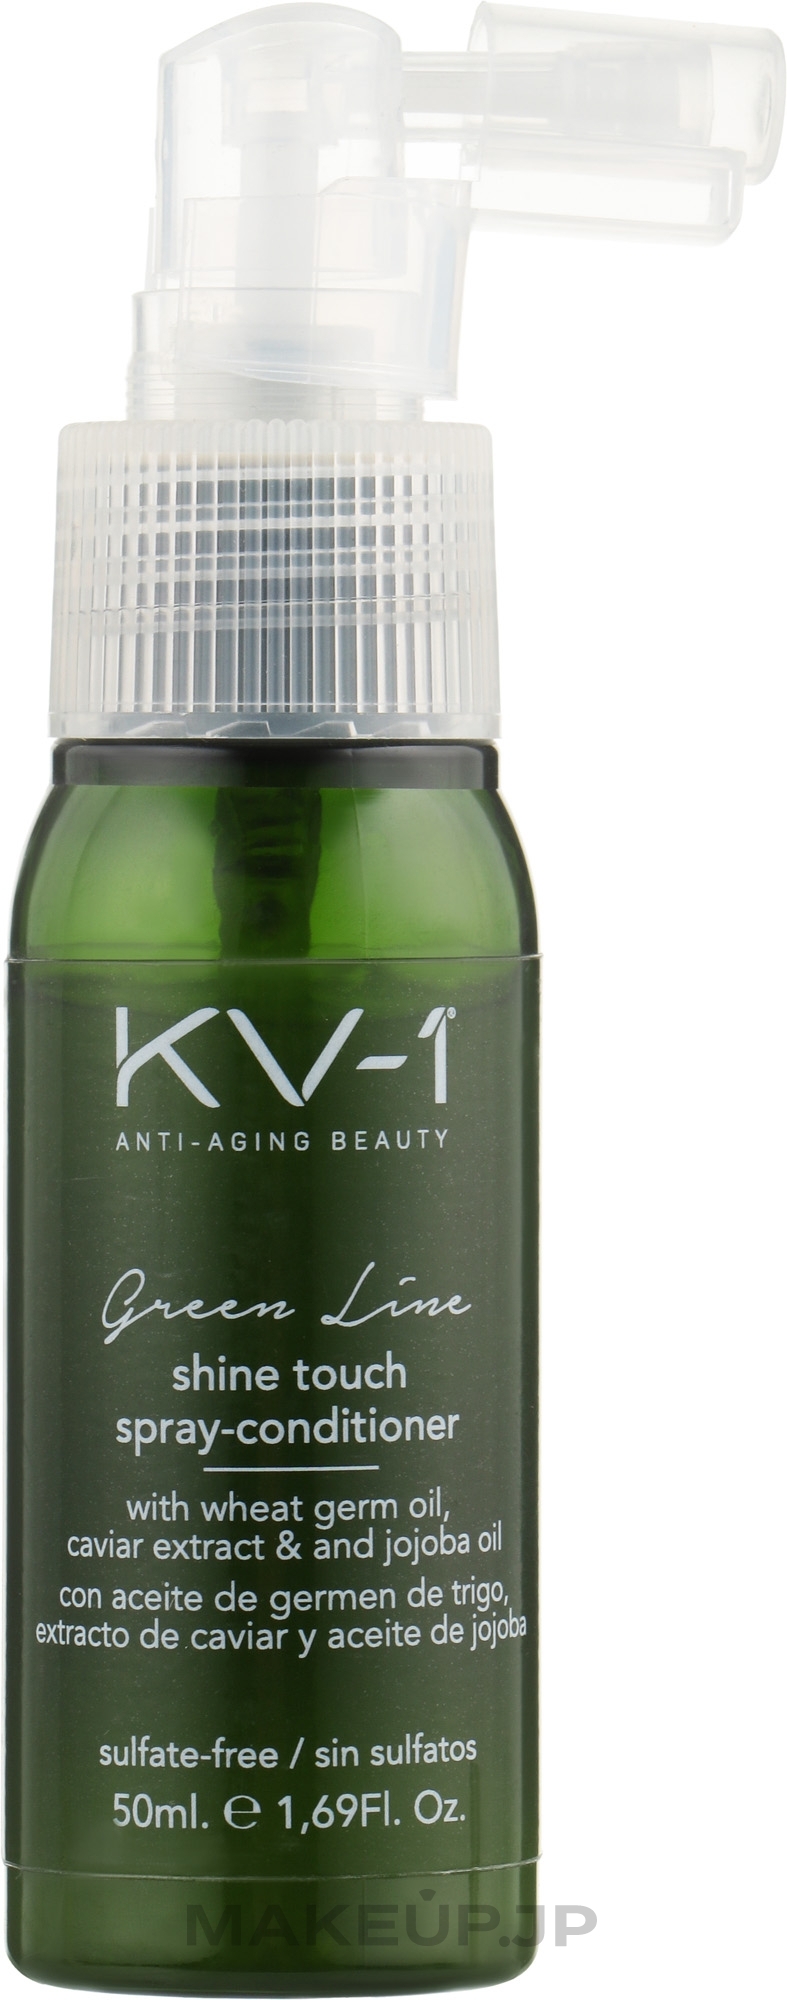 Leave-In Shine Conditioner Spray with Caviar Extract & Jojoba Oil - KV-1 Green Line Shine Touch Spray-Conditioner — photo 50 ml